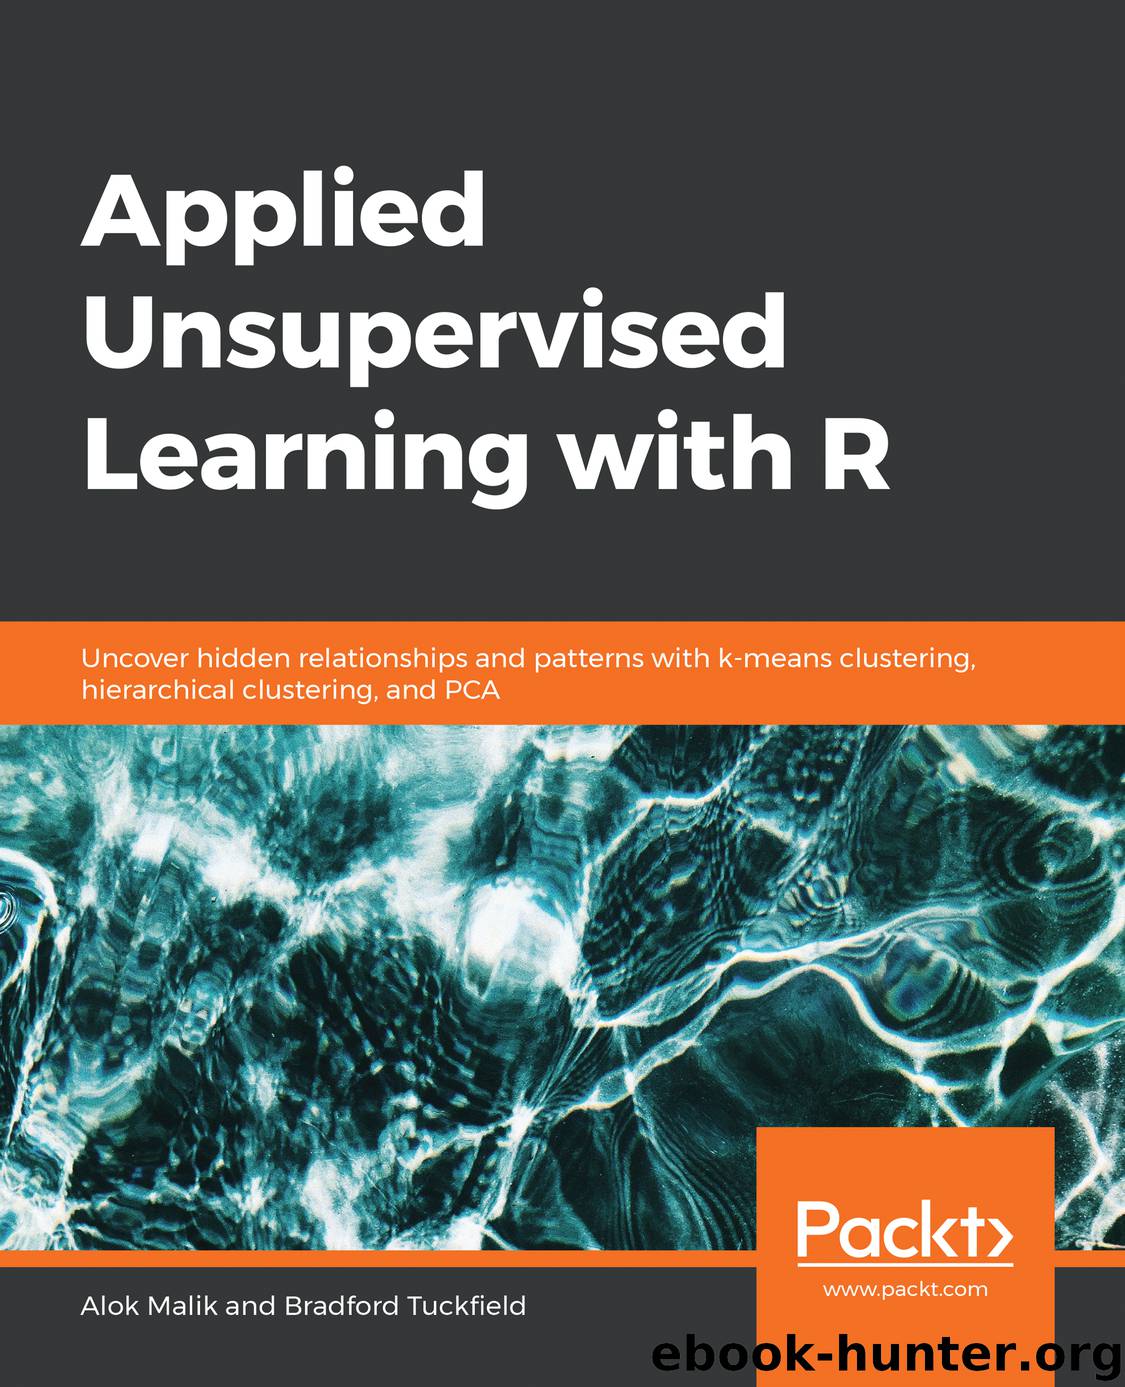 Applied Unsupervised Learning with R by Alok Malik